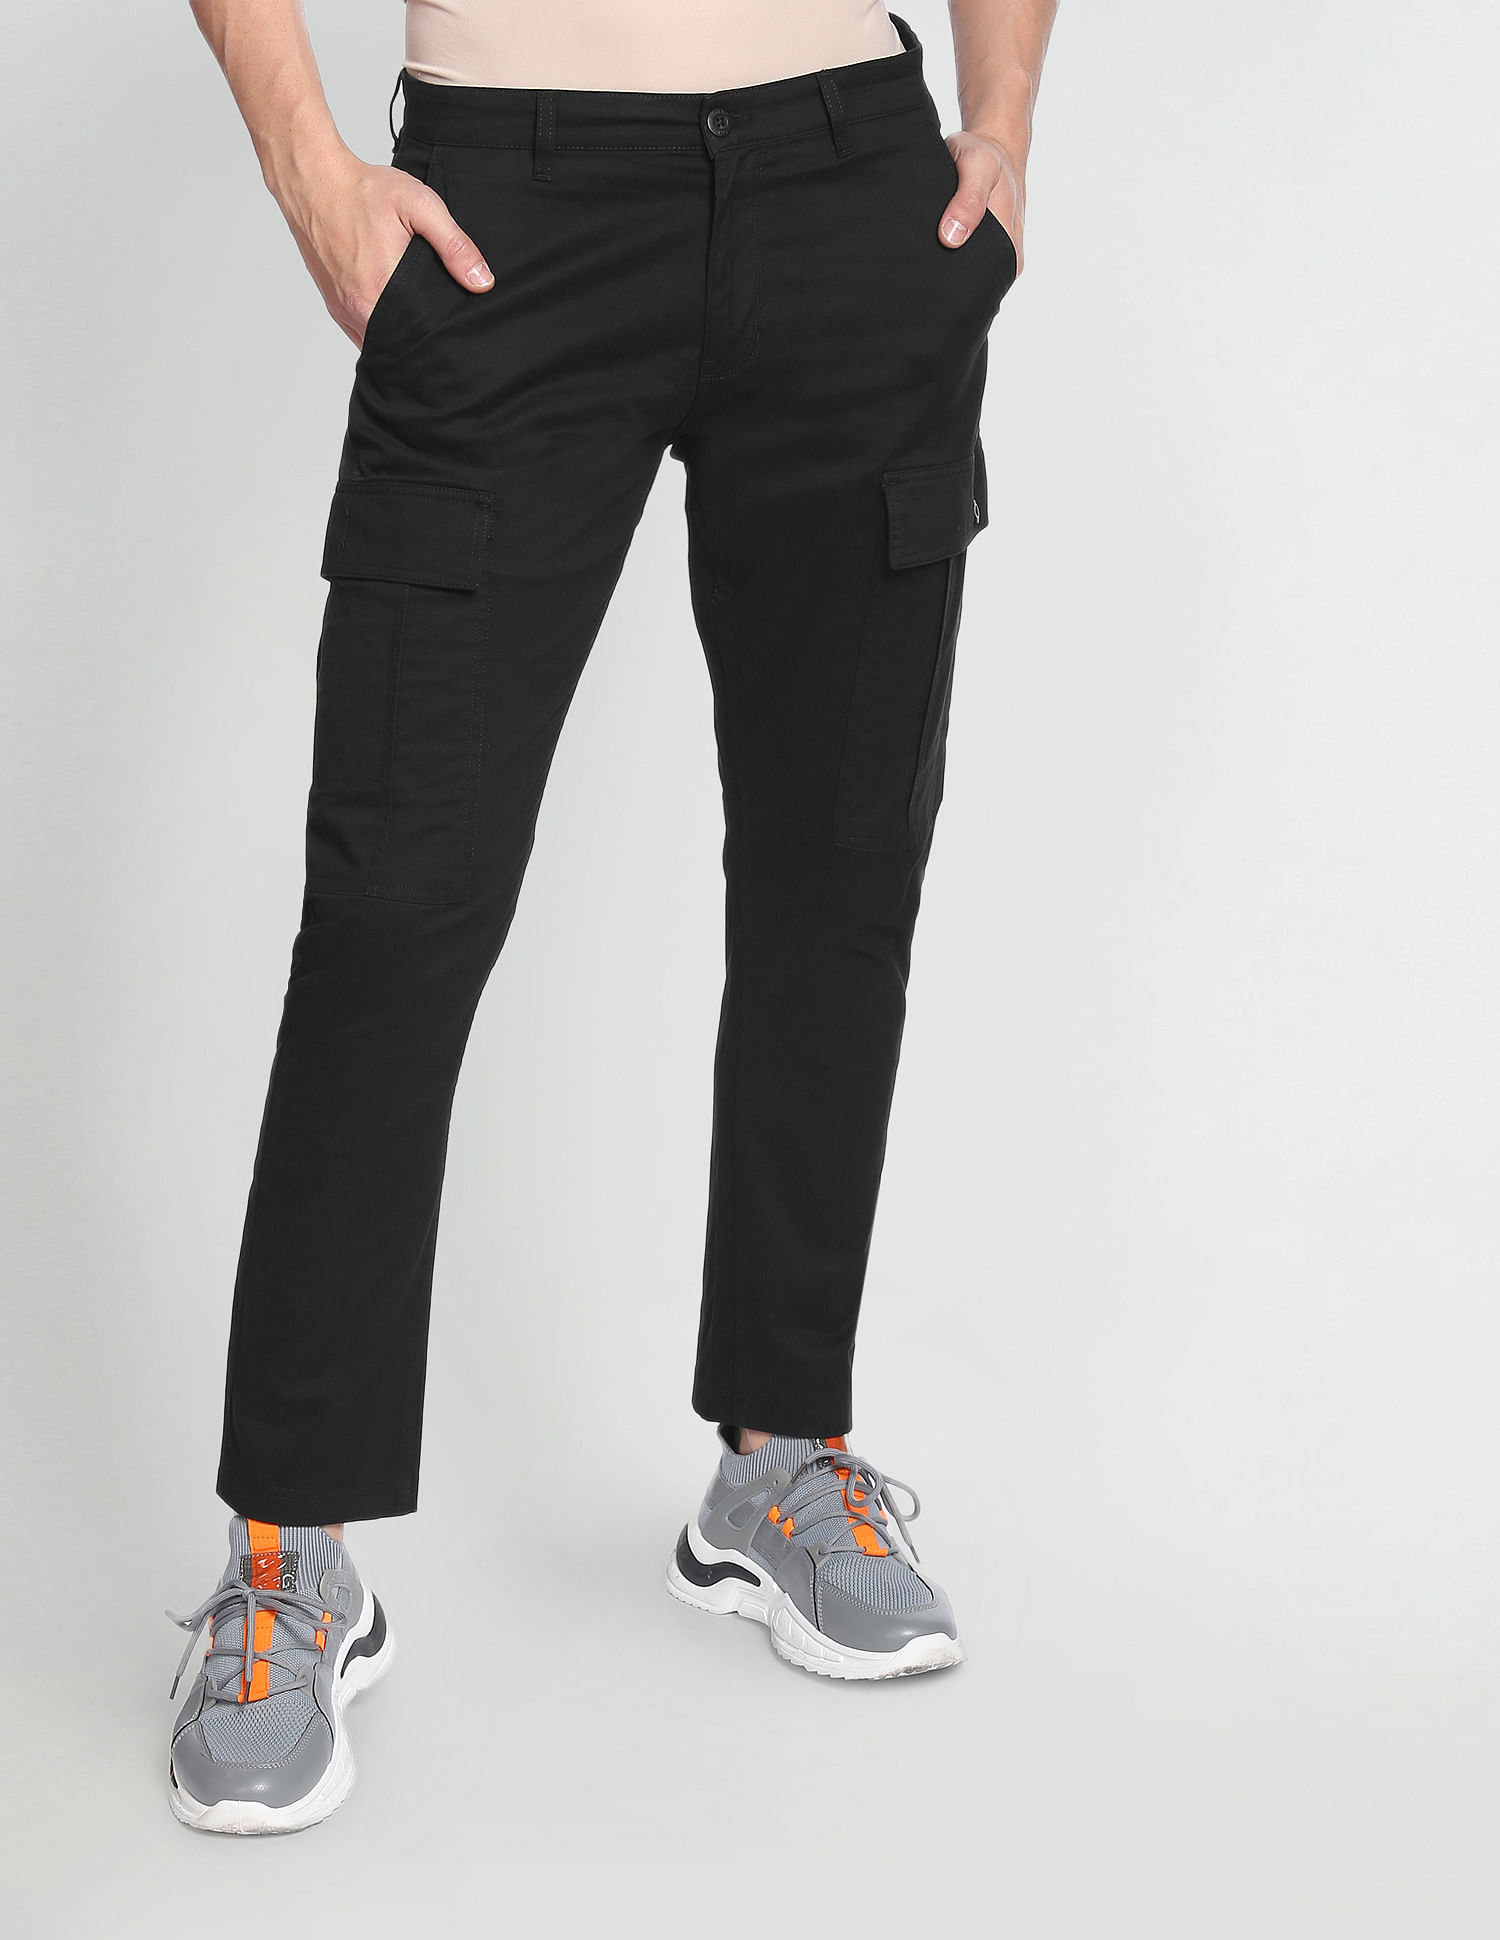 Buy COLLUSION Cargo Trousers & Pants online - 48 products | FASHIOLA.in